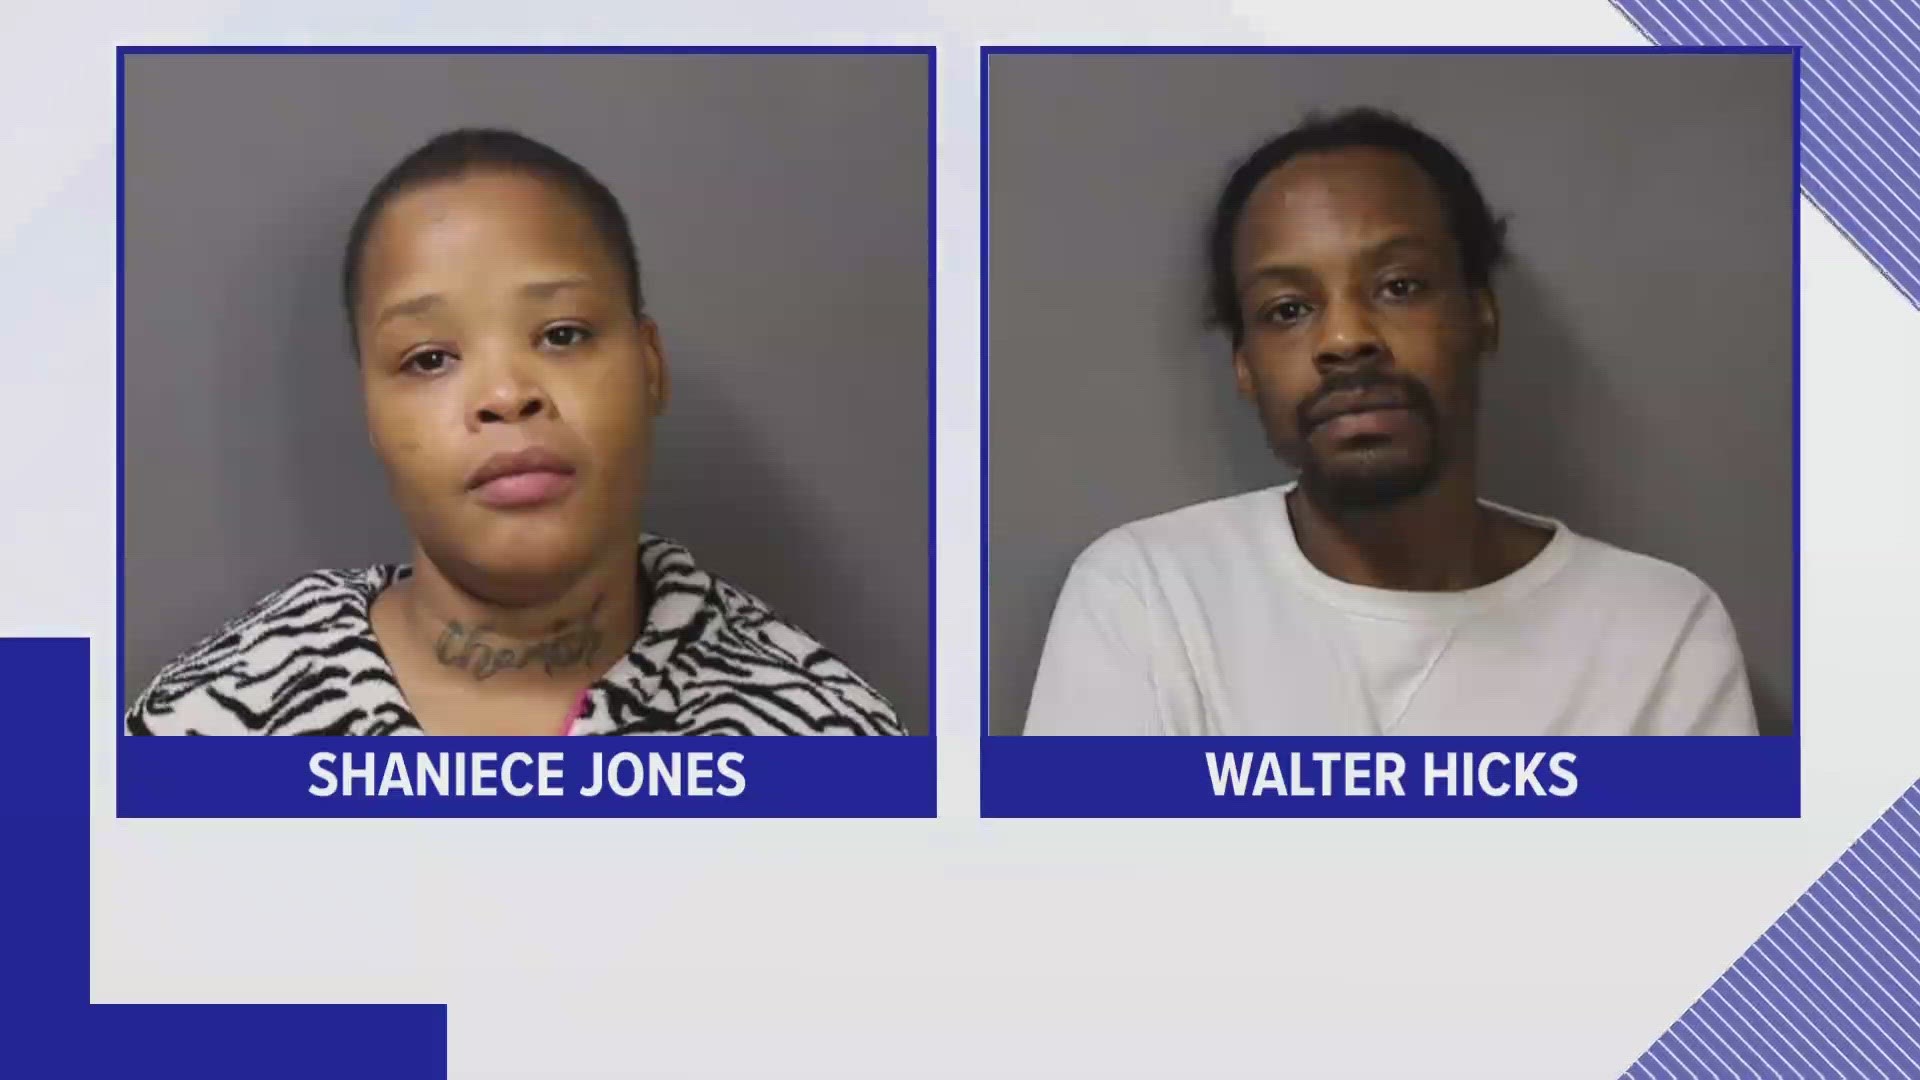 The Erie County District attorney's office says 35-year-old Shaniece Jones and 35-year-old Walter Hicks were found inside the Family Dollar store on Bailey Avenue on